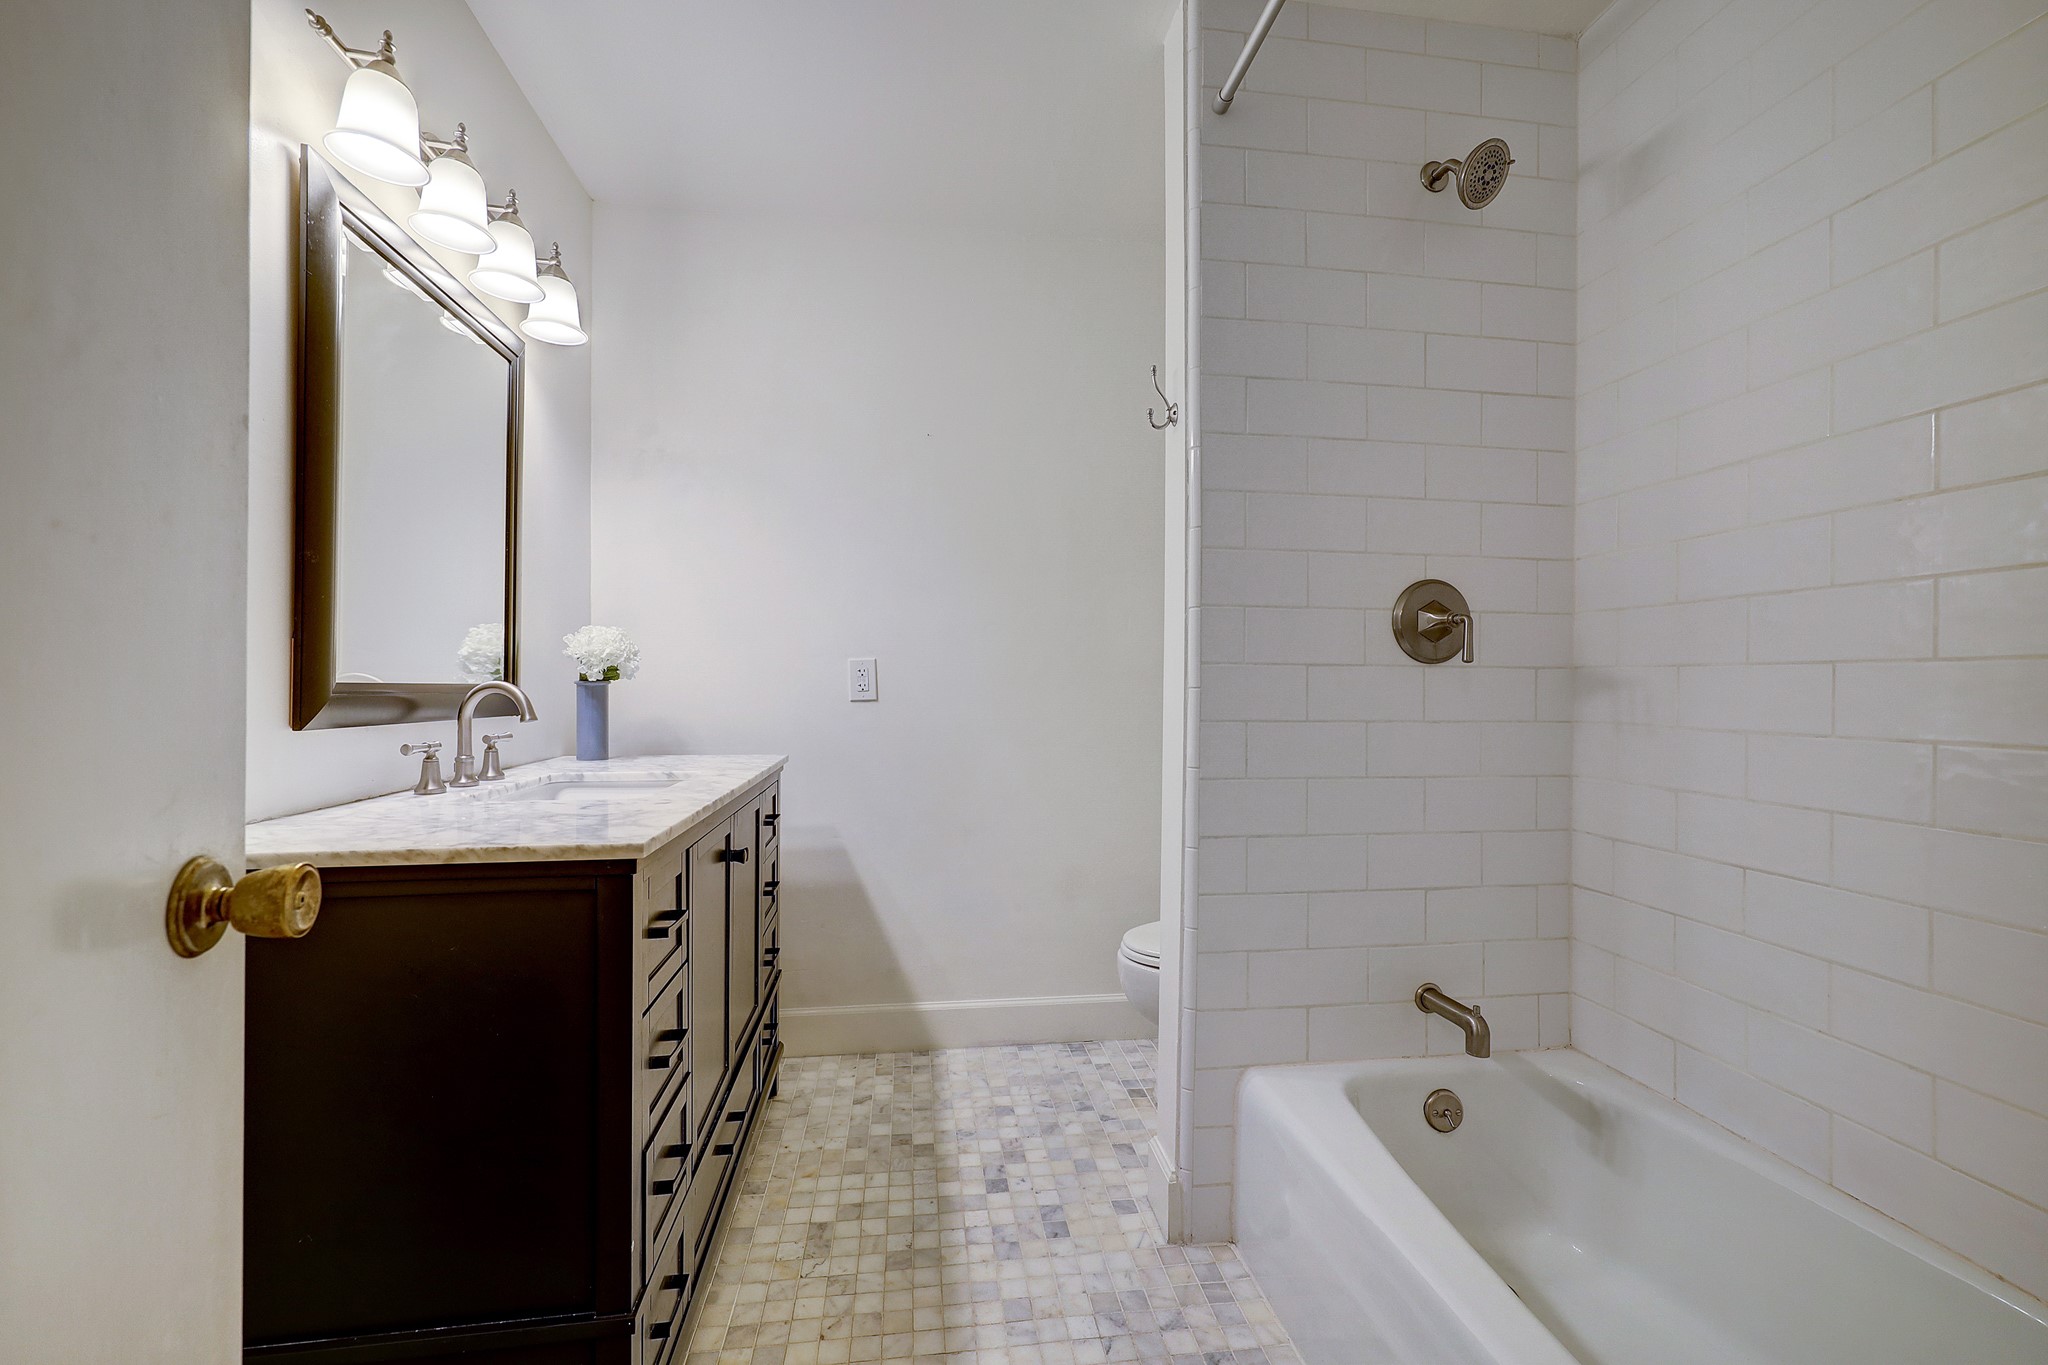 Recently updated secondary bathroom with marble countertops and a tub/shower combo. There is also a powder bath on first floor. *As per seller.